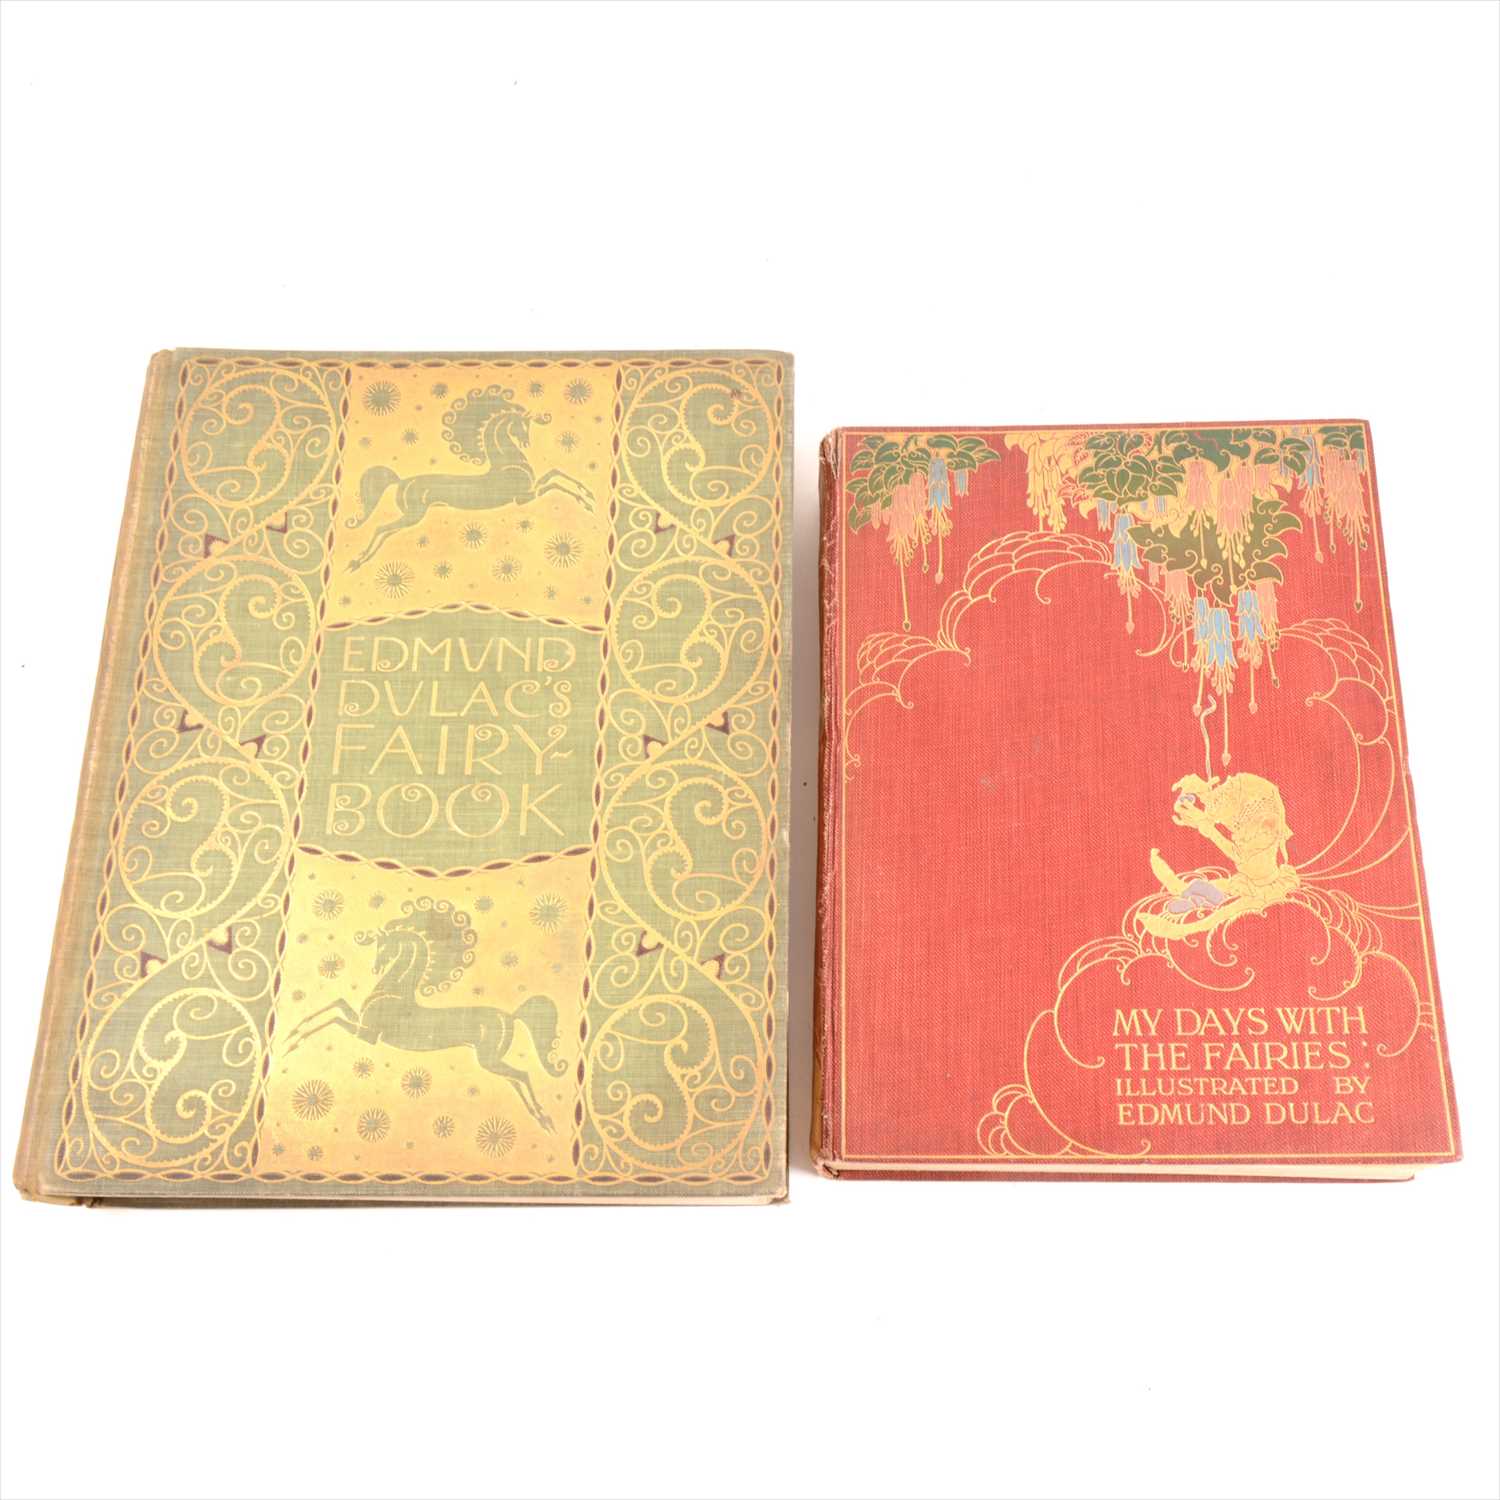 Lot 107 - Mrs Rodolph Stawell [Edmund Dulac, illust.], My Days with the Fairies, Hodder & Stoughton